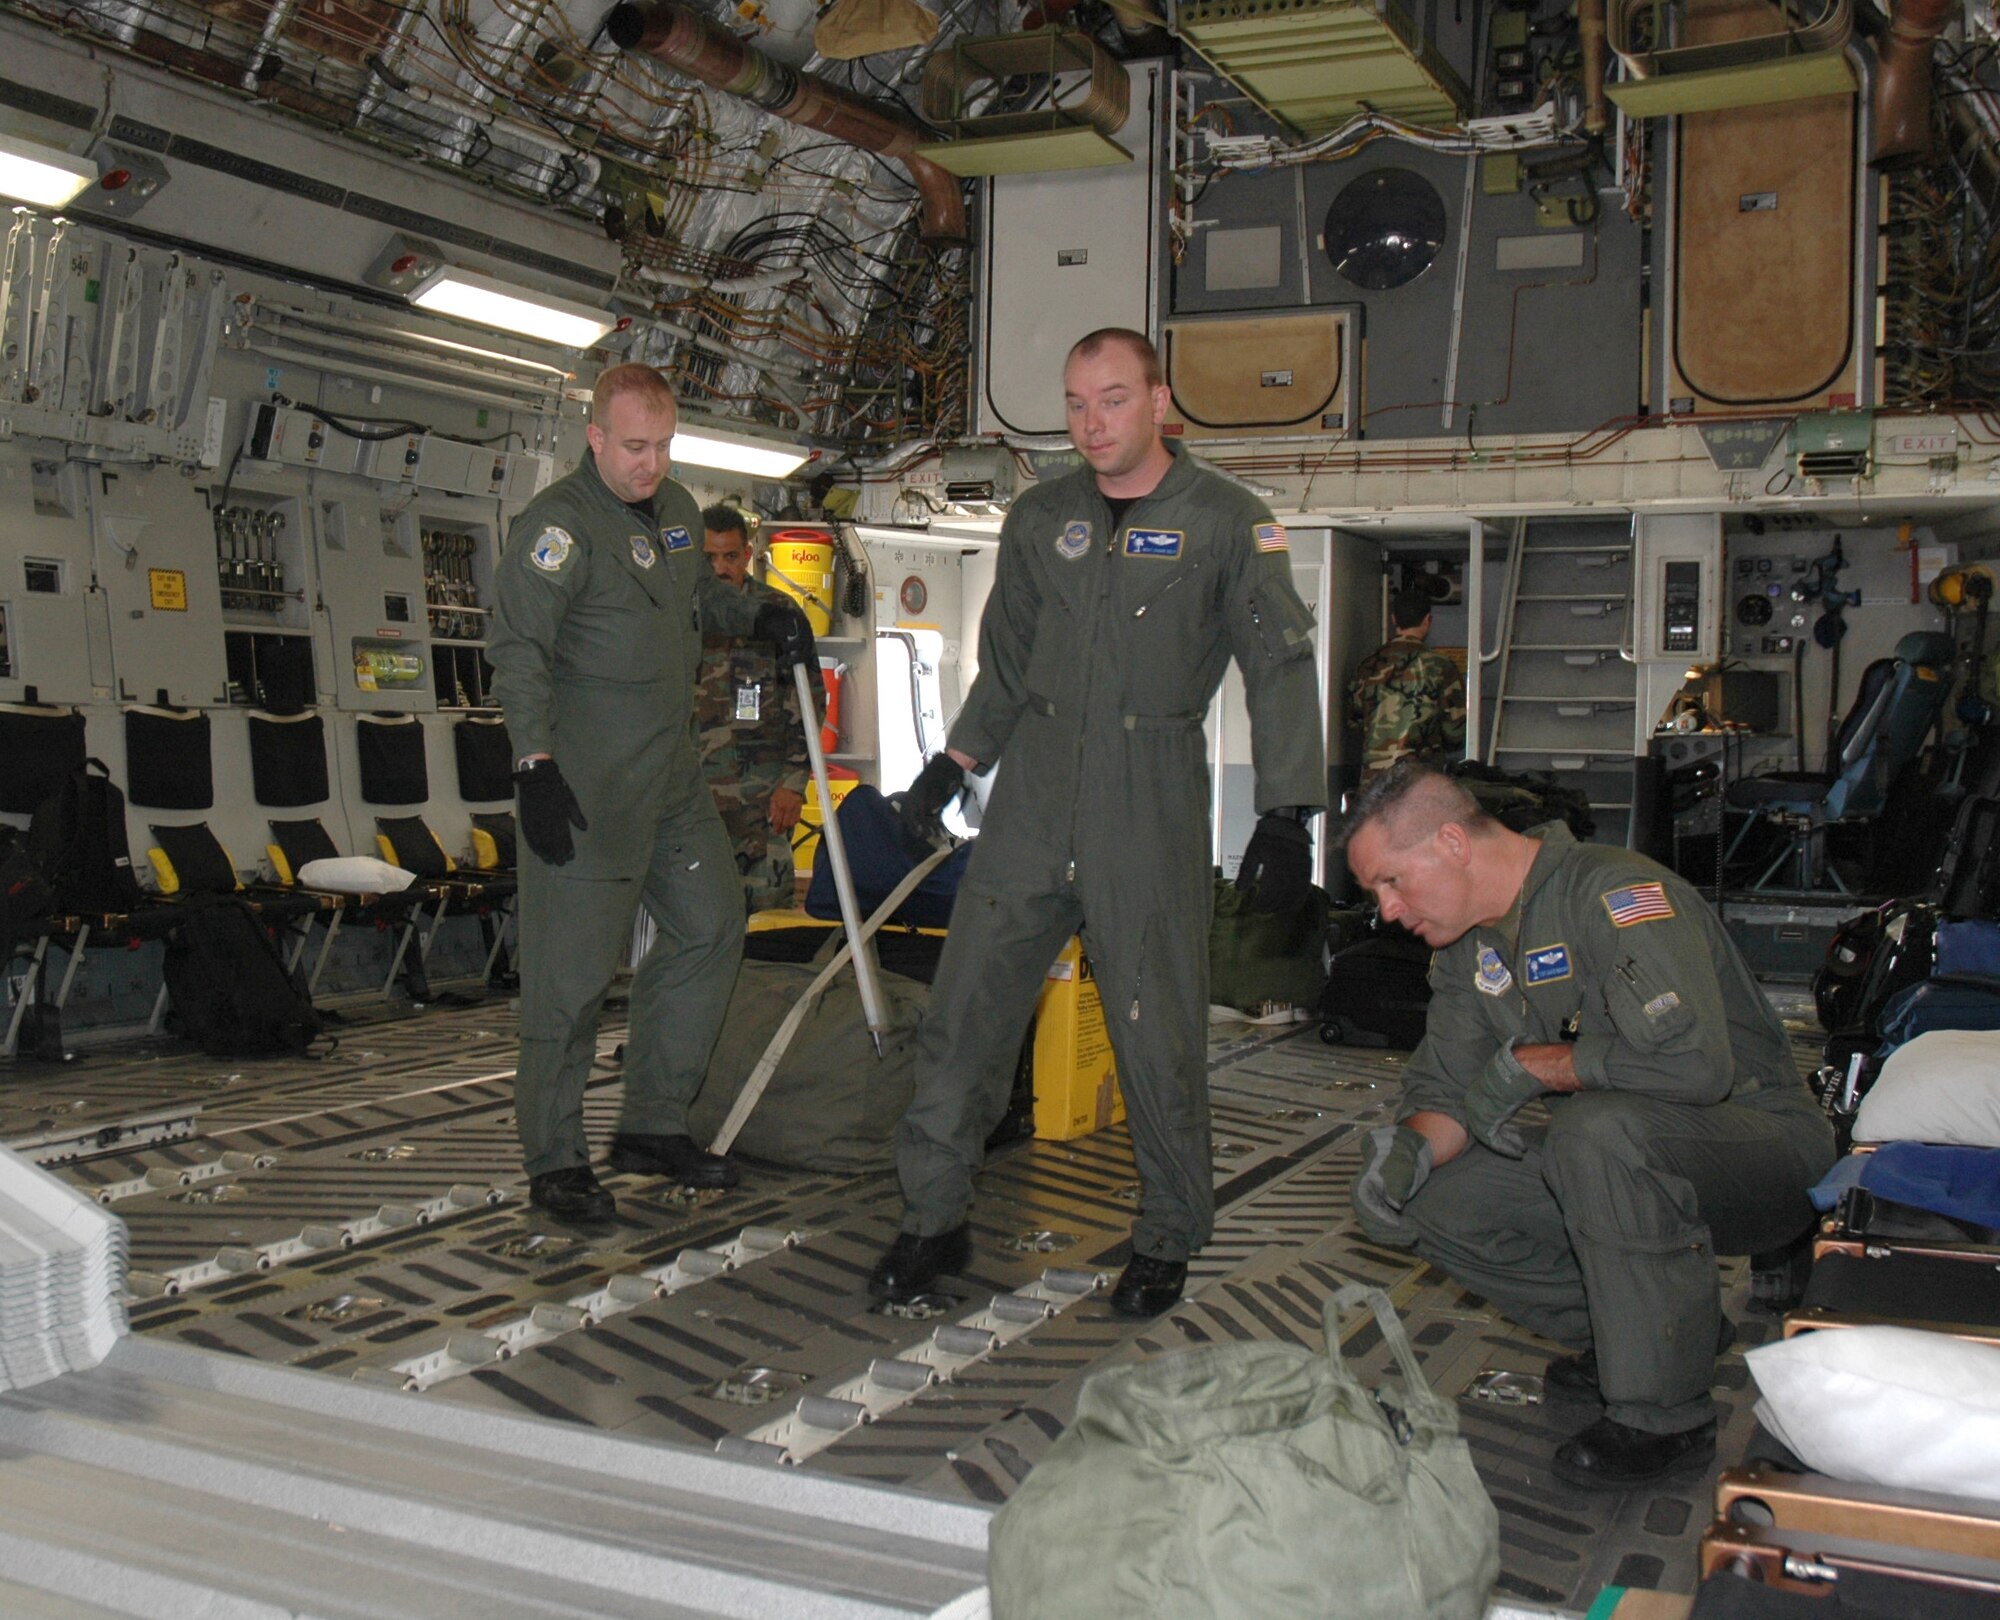 Staff Sgt. Jason Hoffman (left), Master Sgt. Shawn Delp (center) and Tech. Sgt. David Benson (right), reserve loadmasters with the 300th Airlift Squadron, Charleston AFB, S.C., check cargo as it is being loaded on a C-17 Globemaster III during a recent training mission.  (Photo by 1st Lt. Wayne Capps, USAFR)